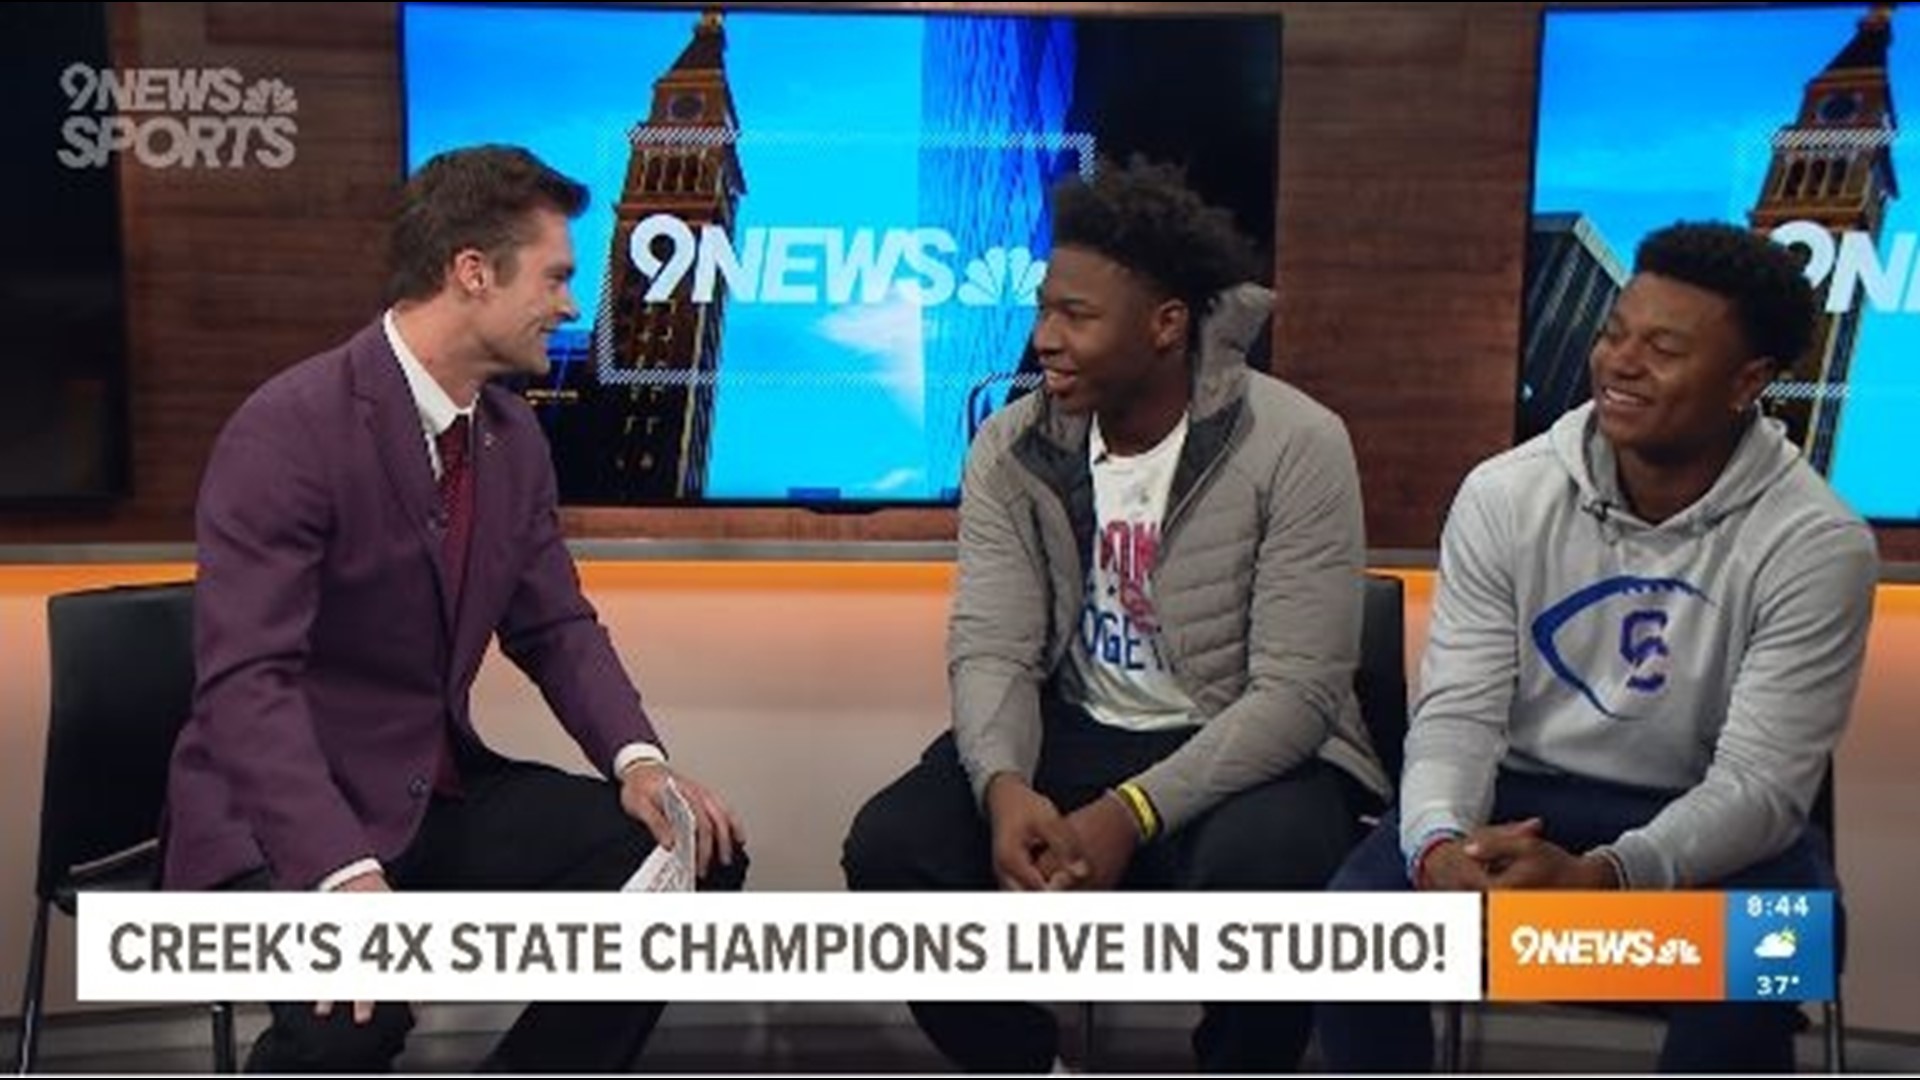 The senior stars joined Gange at 9NEWS to discuss the historic state championship victory